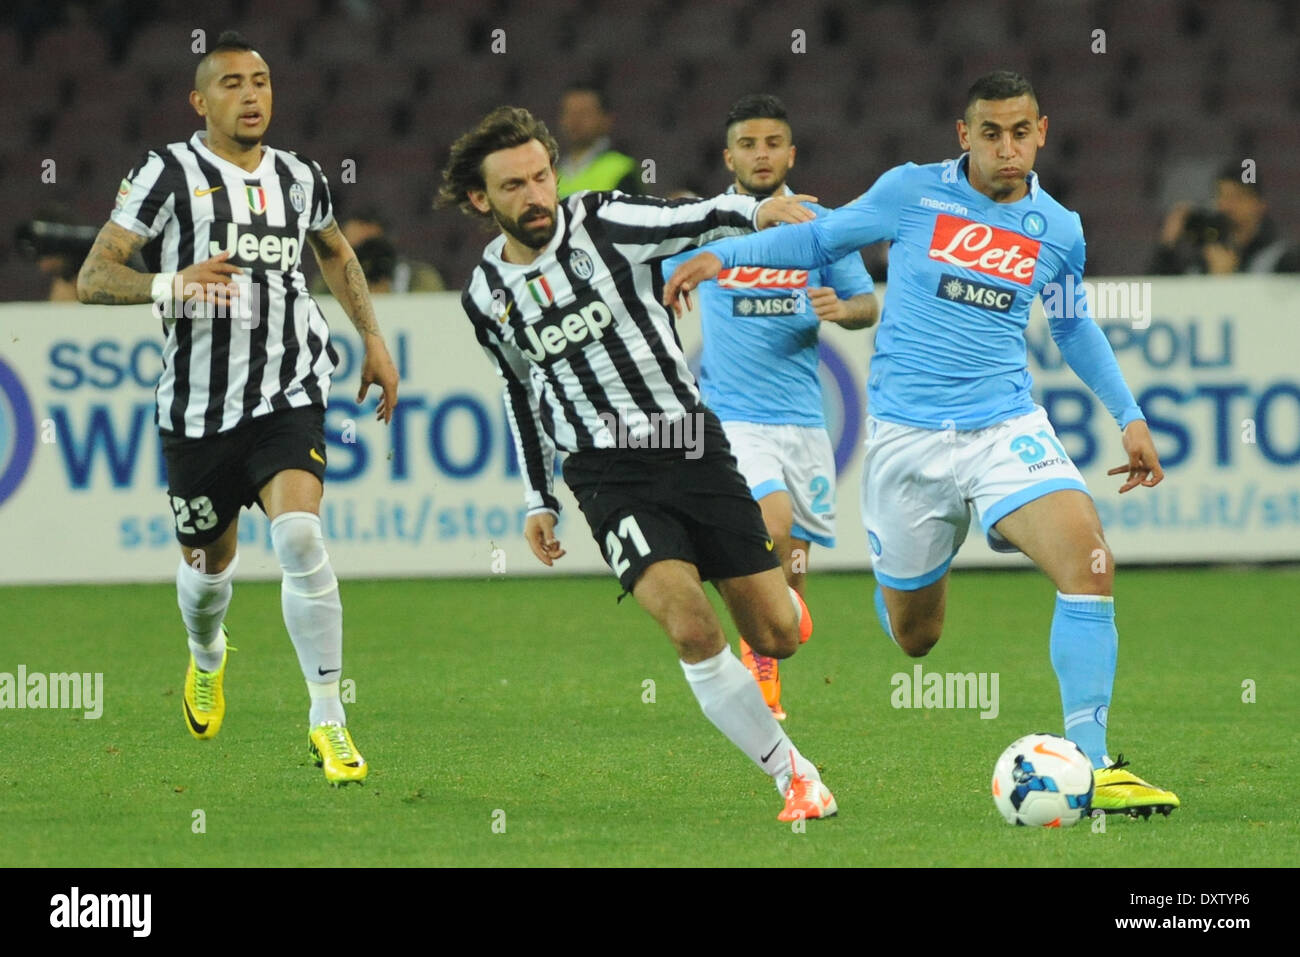 Naples, Italy. 30th Mar, 2014. Andrea Pirlo competes for the ball with Faouzi Ghoulam during Italian Serie A match between SSC Napoli and Juventus Football/Soccer at Stadio San Paolo on March 30, 2014 in Naples, Italy. © Franco Romano/NurPhoto/ZUMAPRESS.com/Alamy Live News Stock Photo